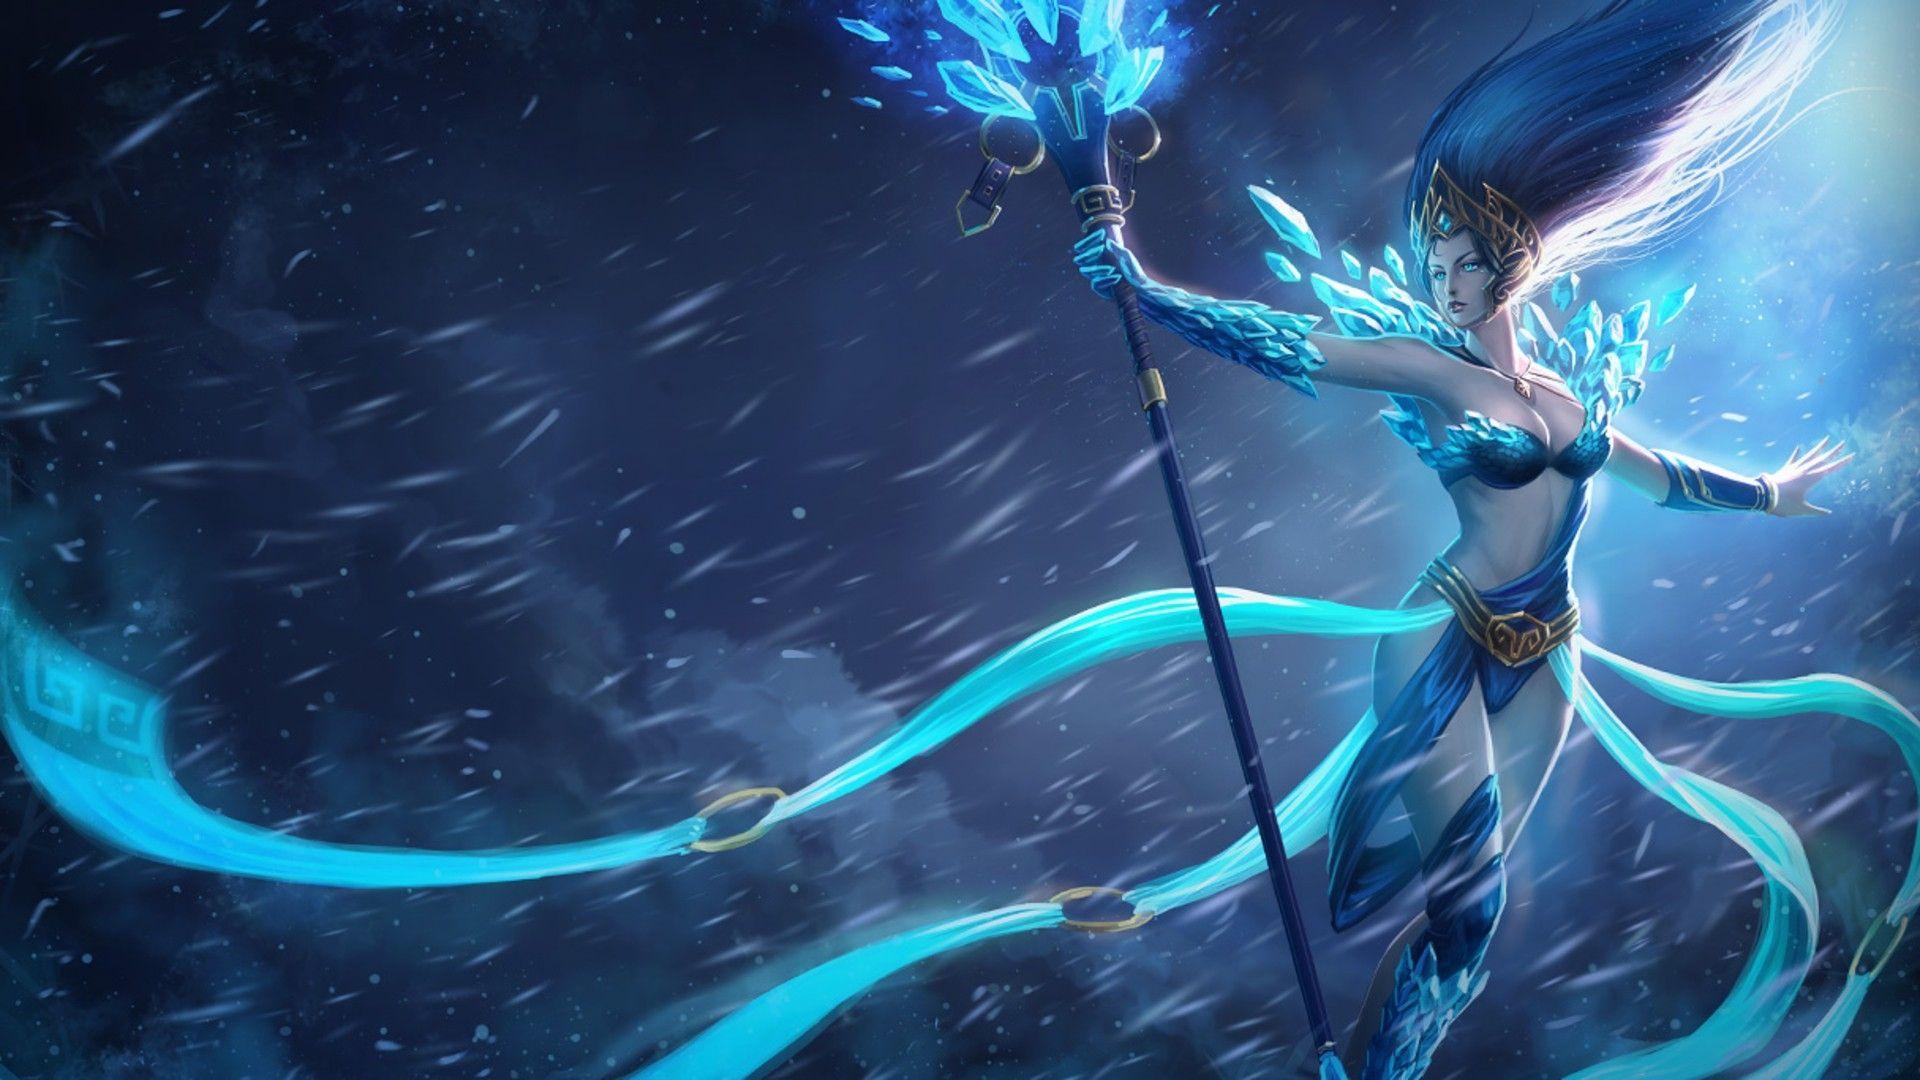 mage video games ice league of legends fantasy art frost janna